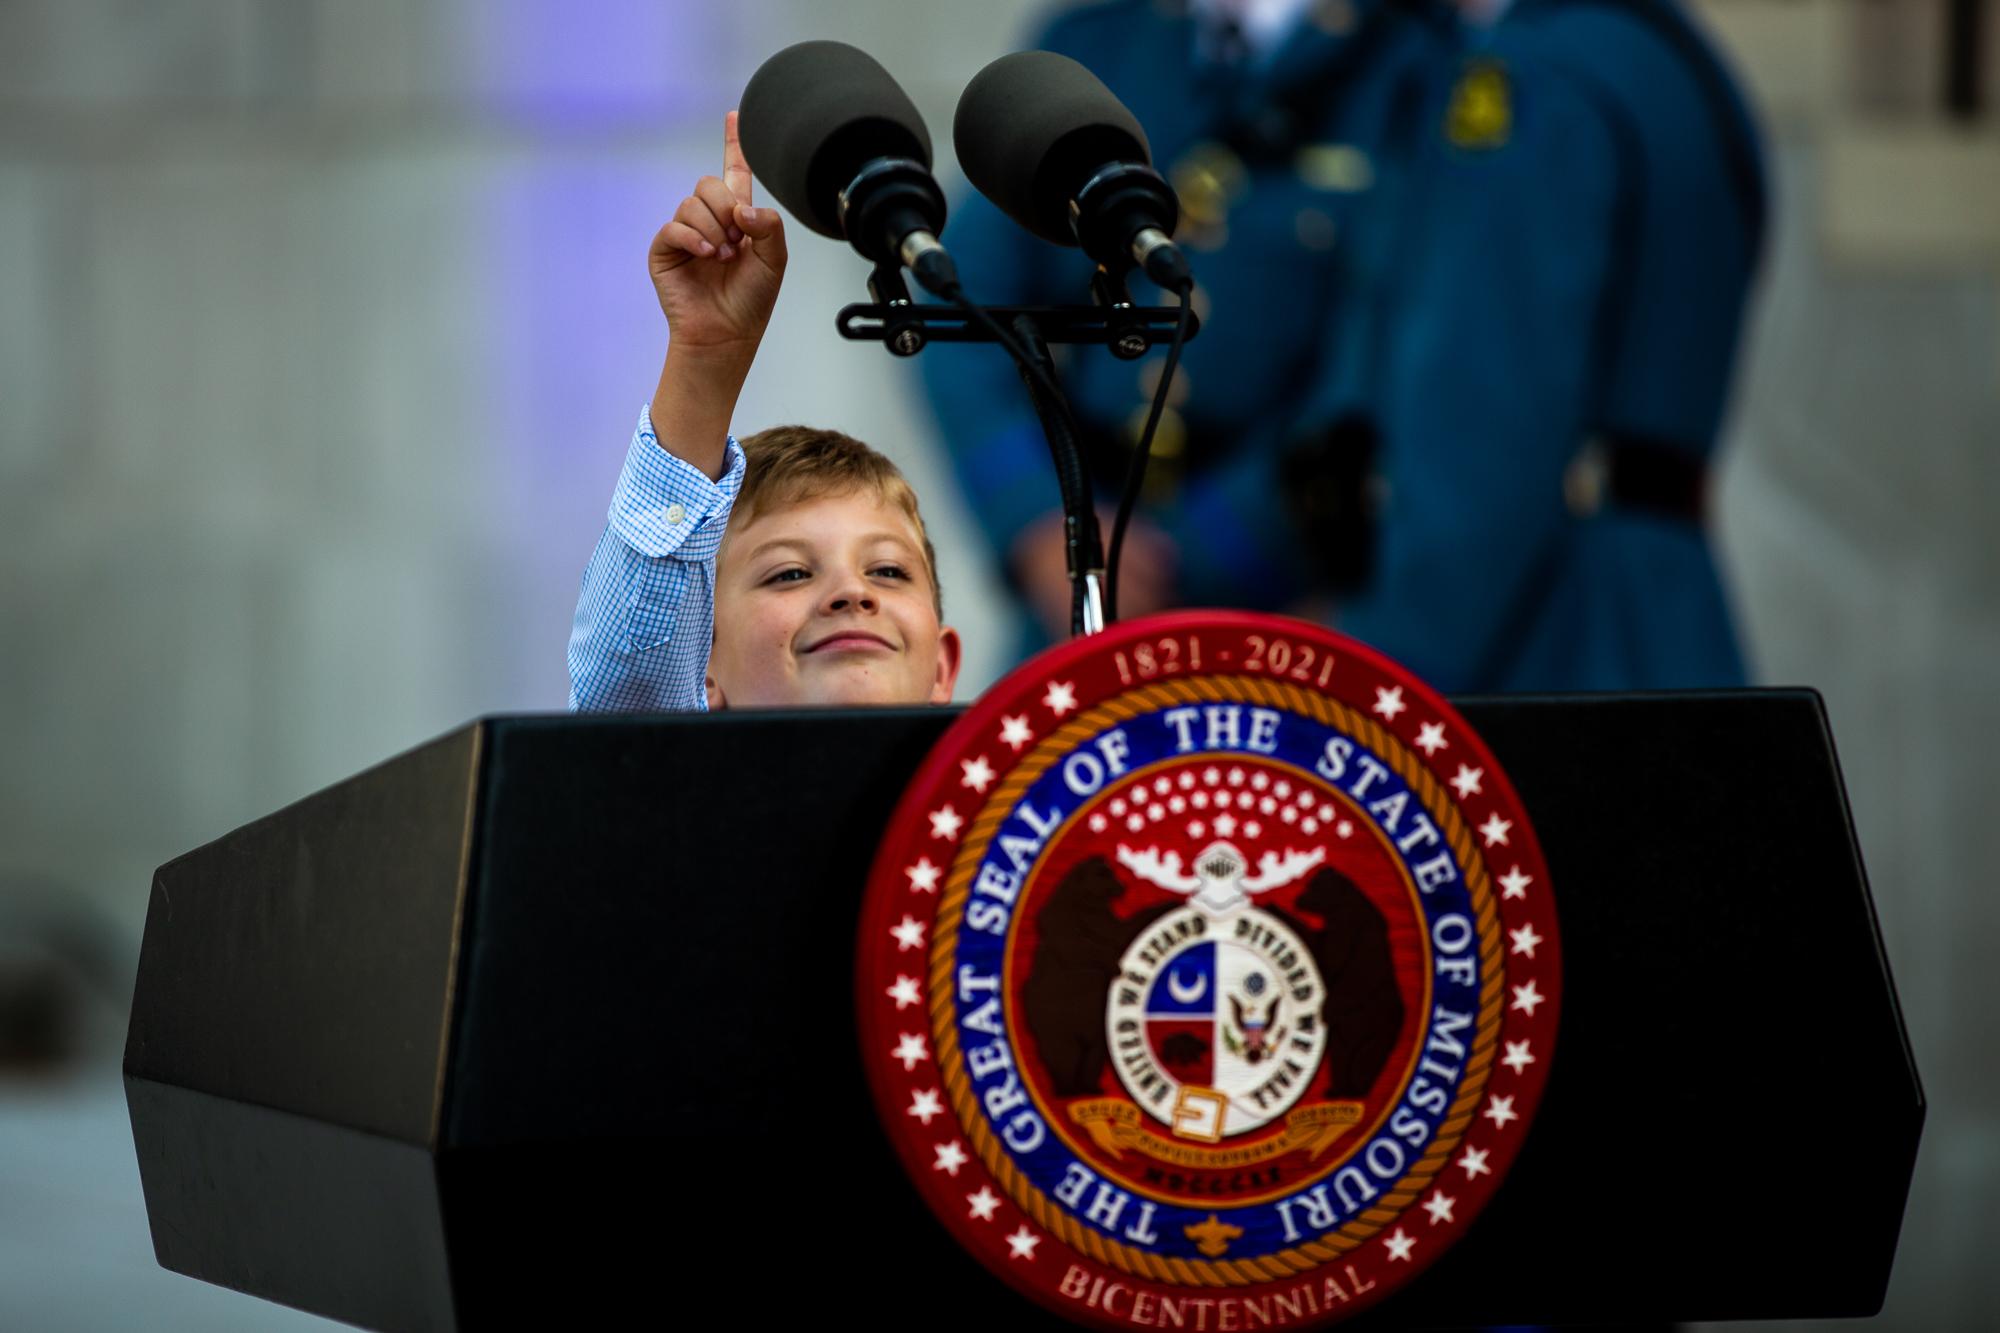 Hunter Chapman, 9, reaches for the podium microphones ahead of the Missouri Bicentennial Ball on Saturday, September 18, 2021 in Jefferson City,...